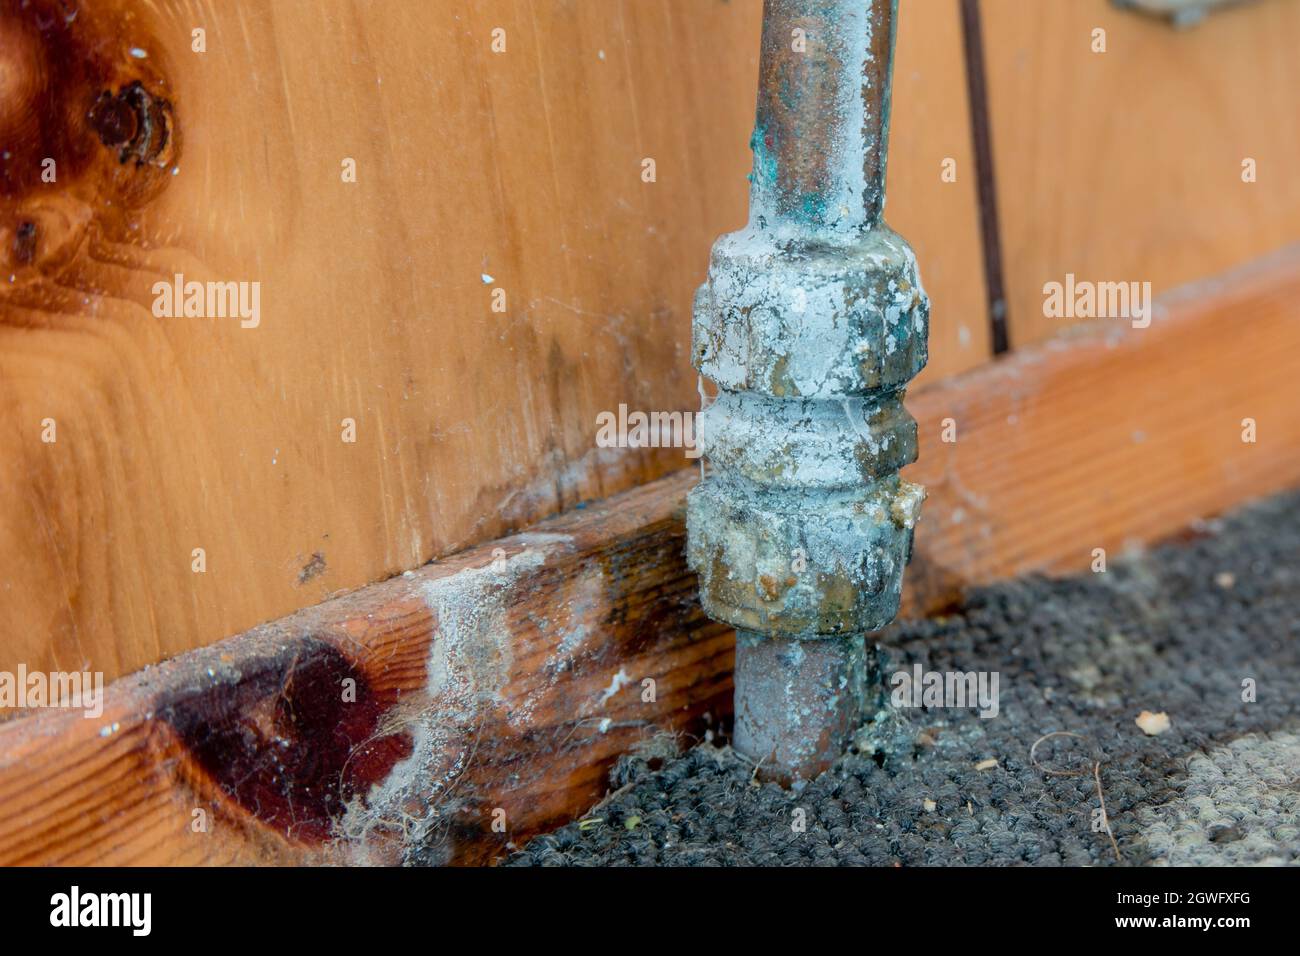 Old leaking pipe with water and limescale damage on old carpet and wood panelling Stock Photo